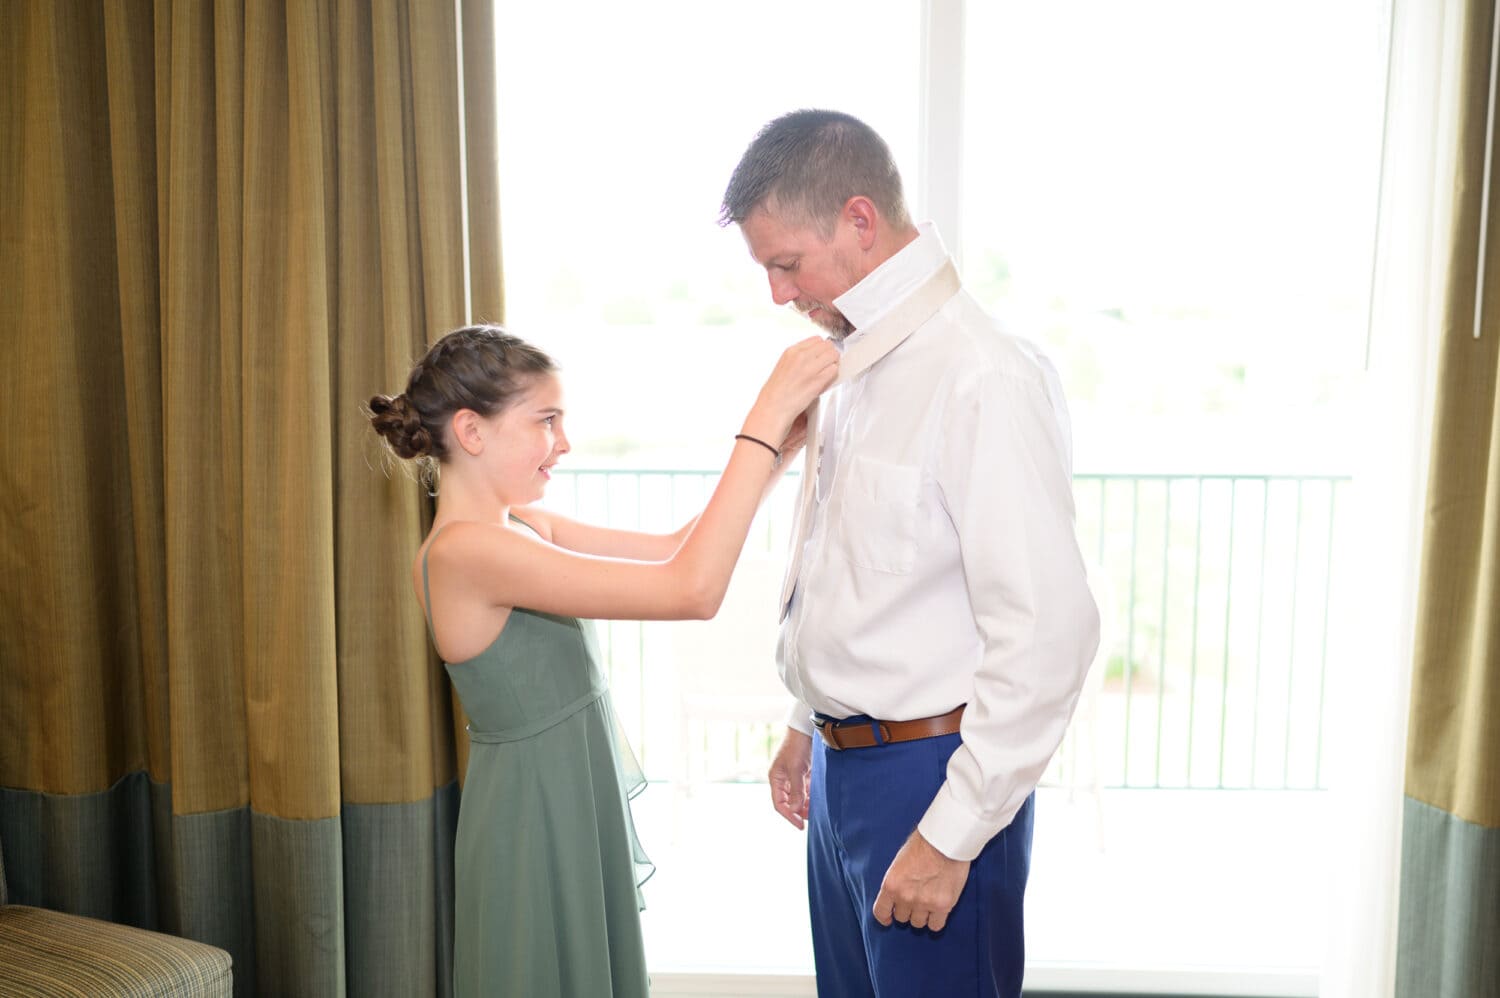 Helping dad with his tie - The Marina Inn